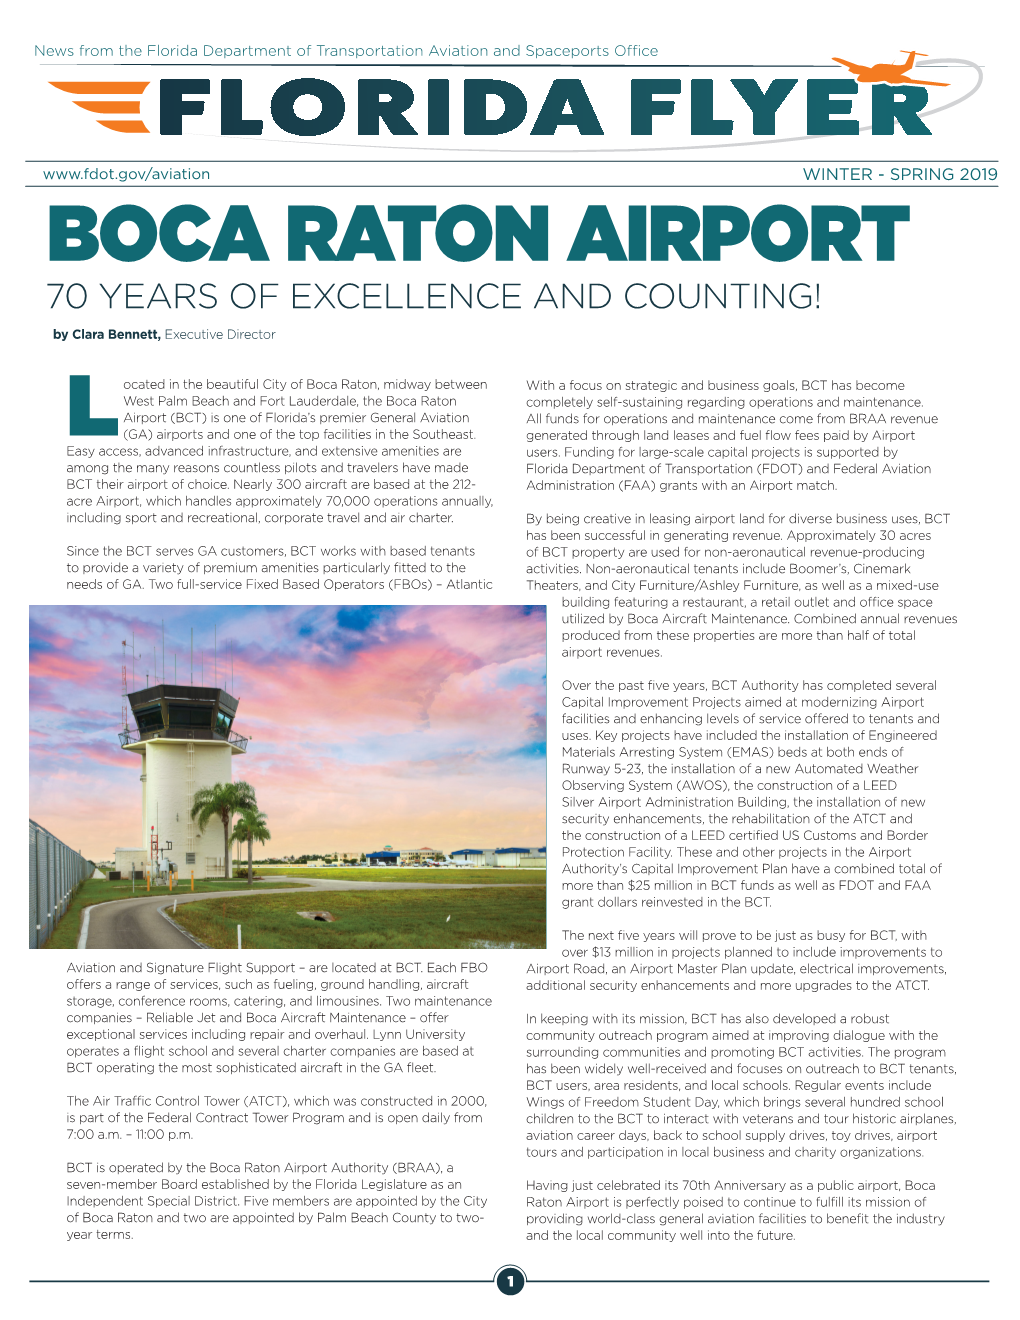 Boca Raton Airport 70 Years of Excellence and Counting!